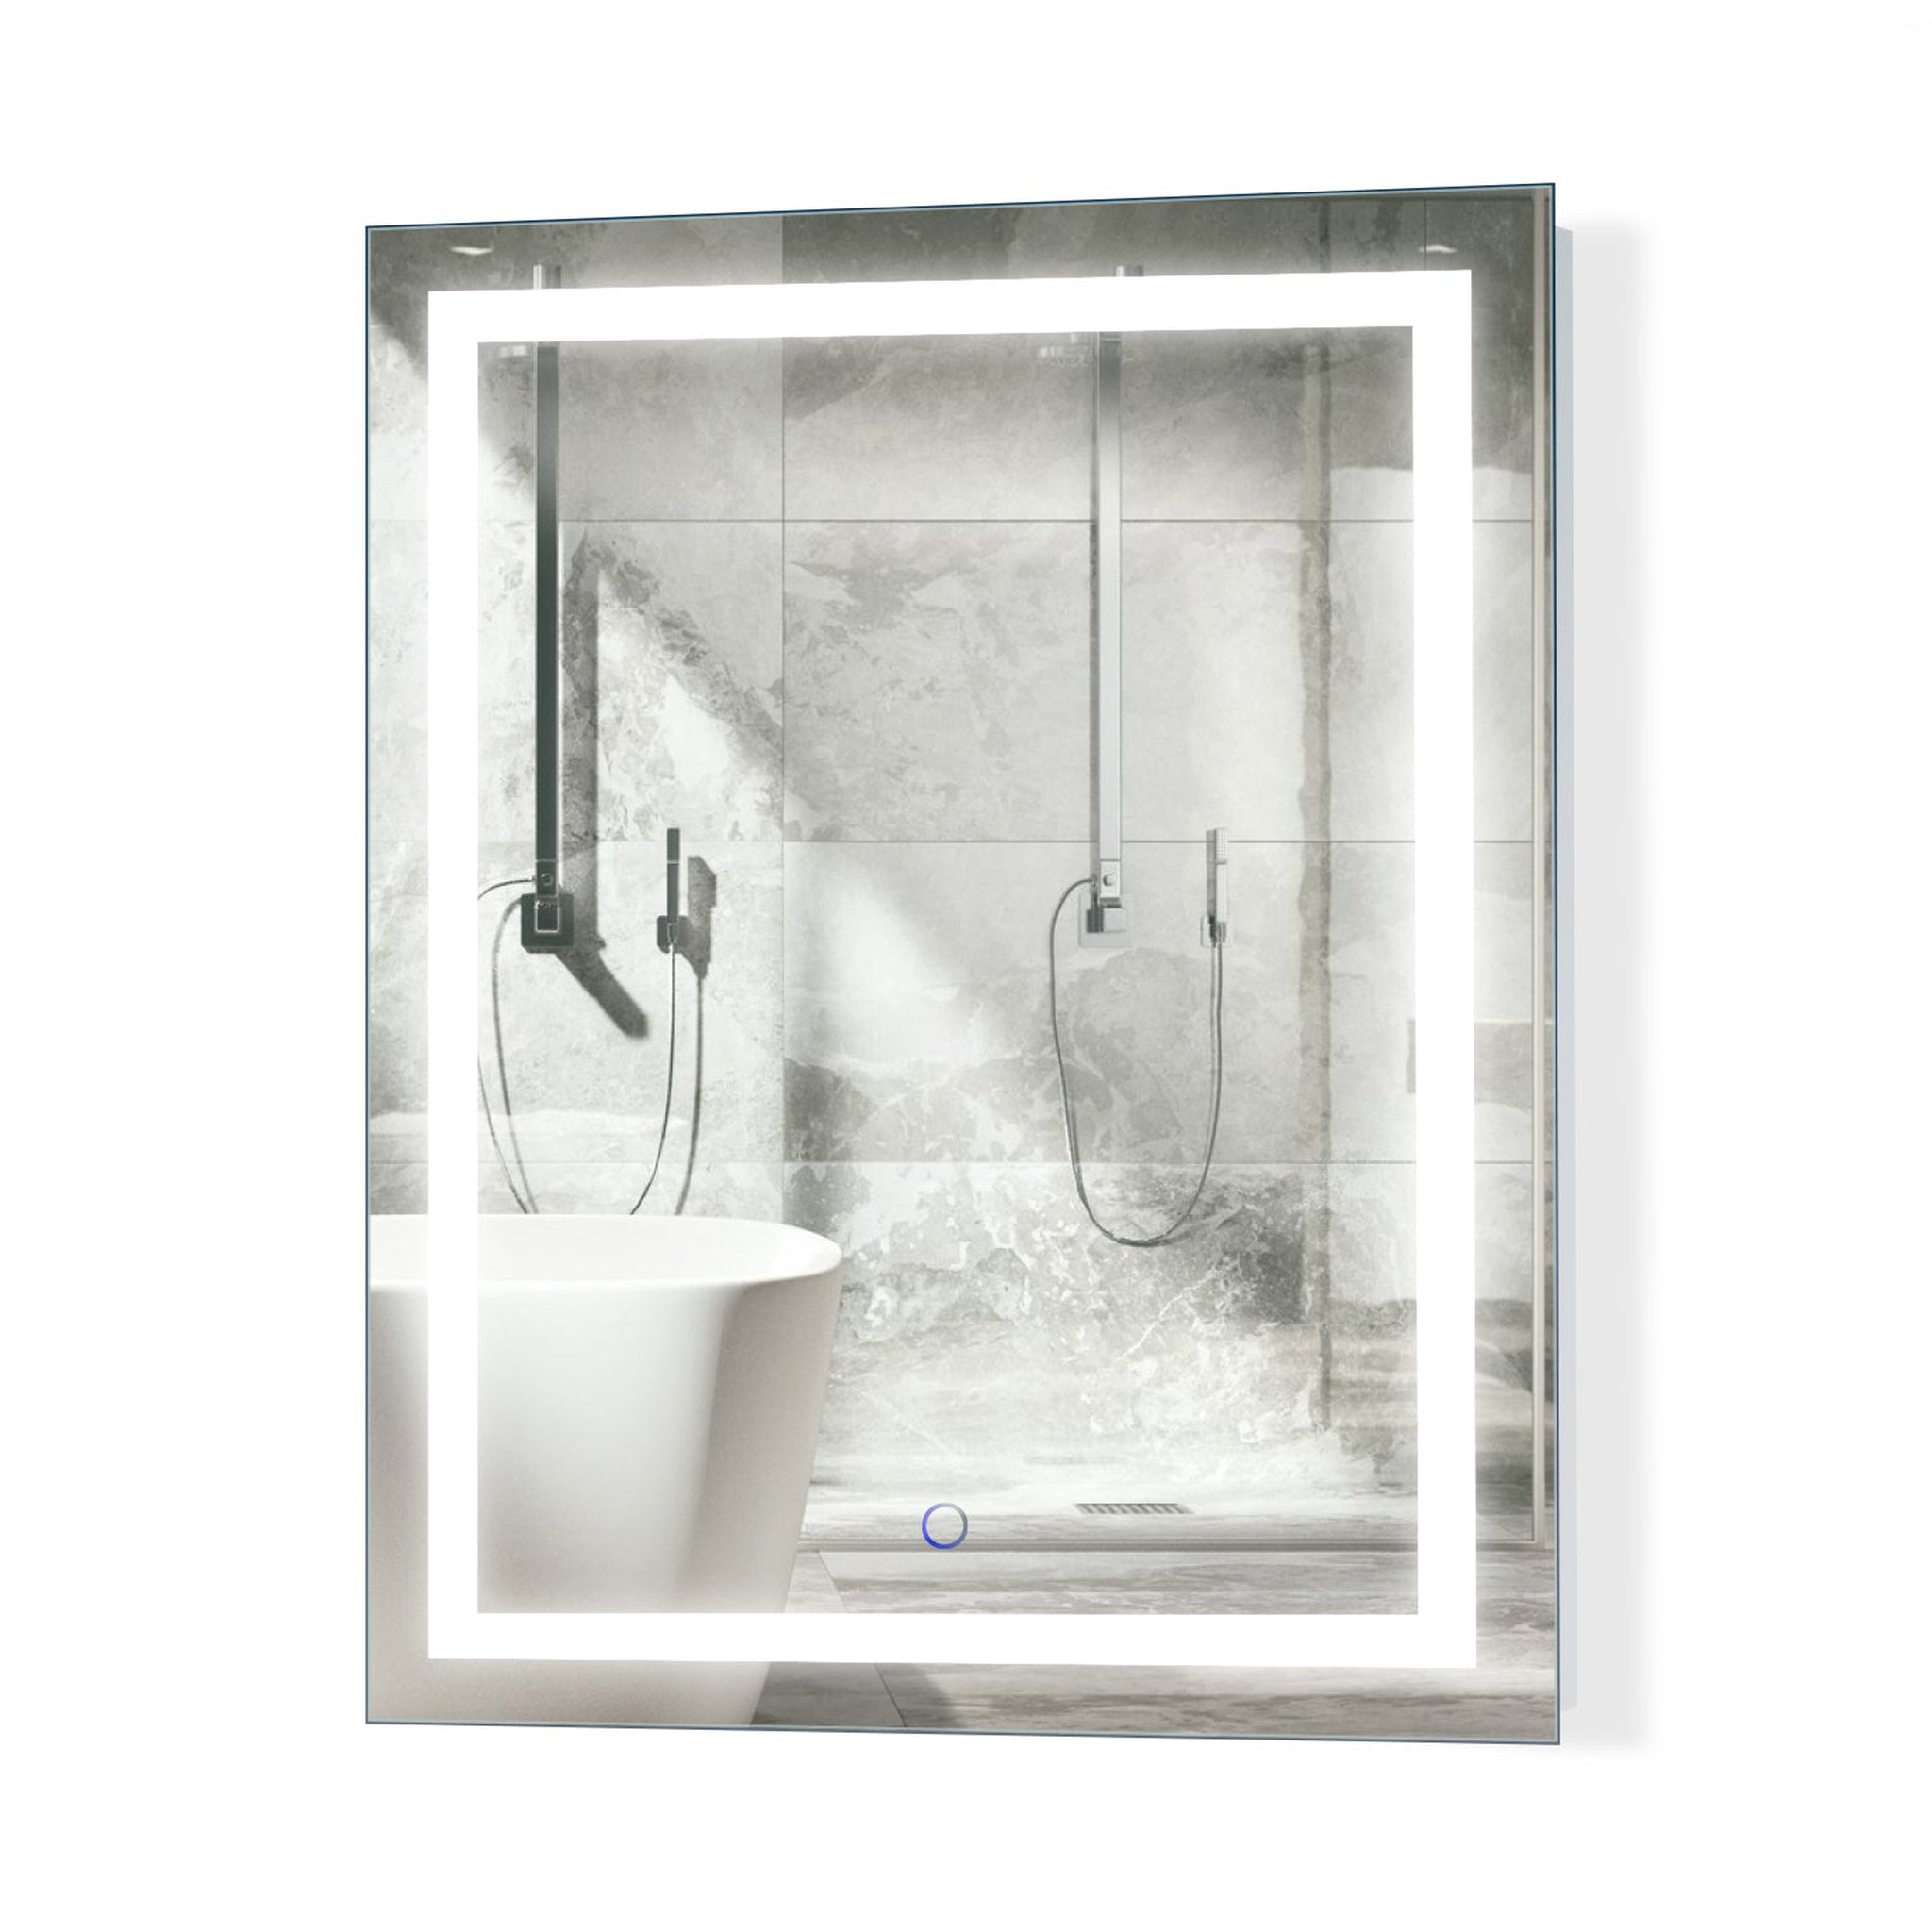 Krugg Reflections, Krugg Reflections Icon 24" x 30" 5000K Rectangular Wall-Mounted Illuminated Silver Backed LED Mirror With Built-in Defogger and Touch Sensor On/Off Built-in Dimmer